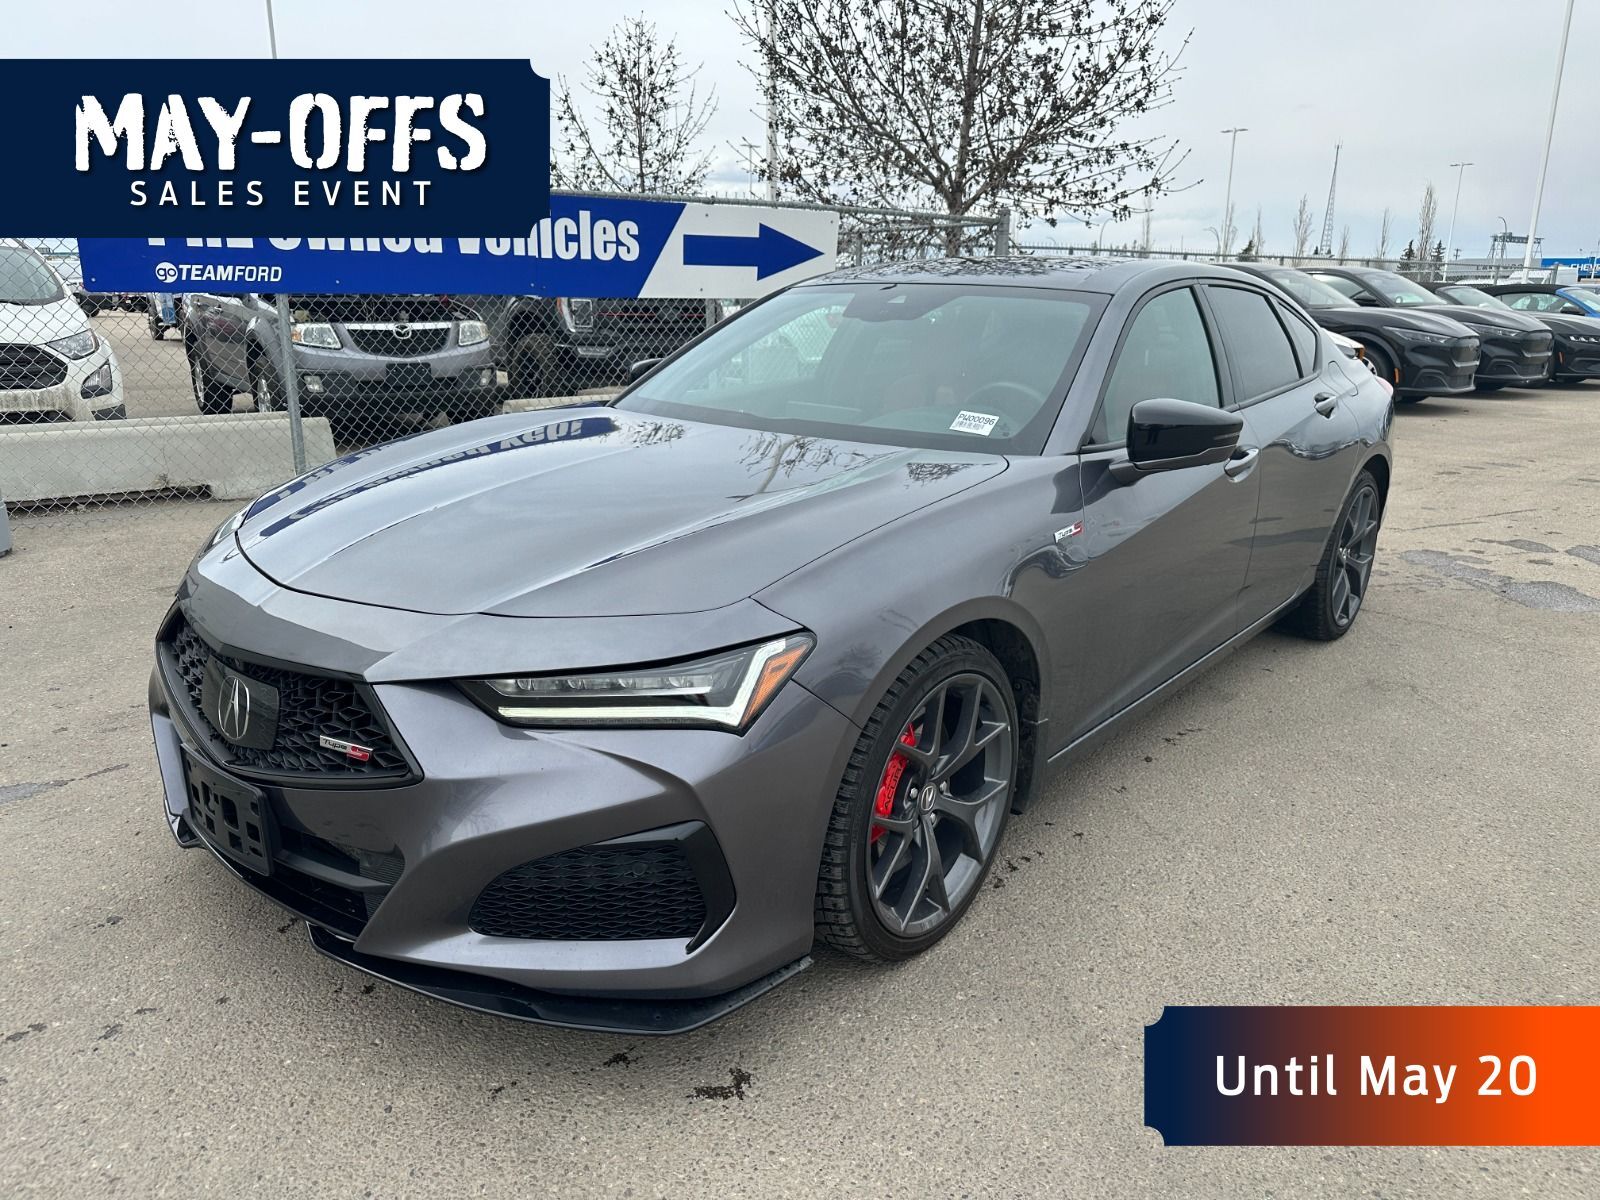 2022 Acura TLX TLX TYPE S - V6, LEATHER, MOONROOF, HEATED SEATS, 